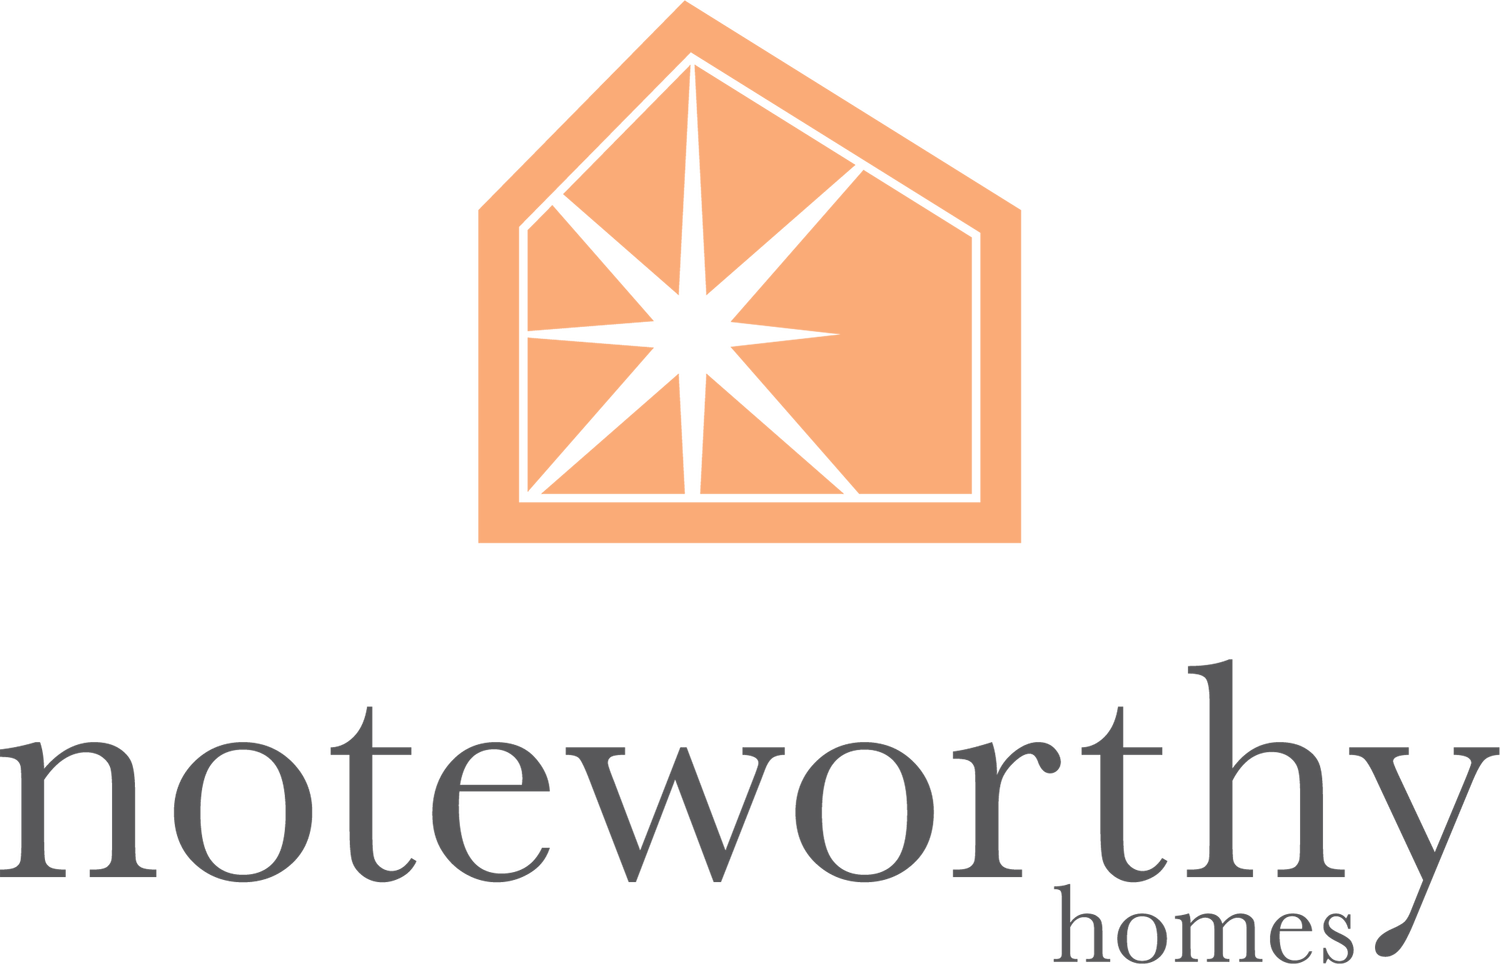 NoteWorthy Homes